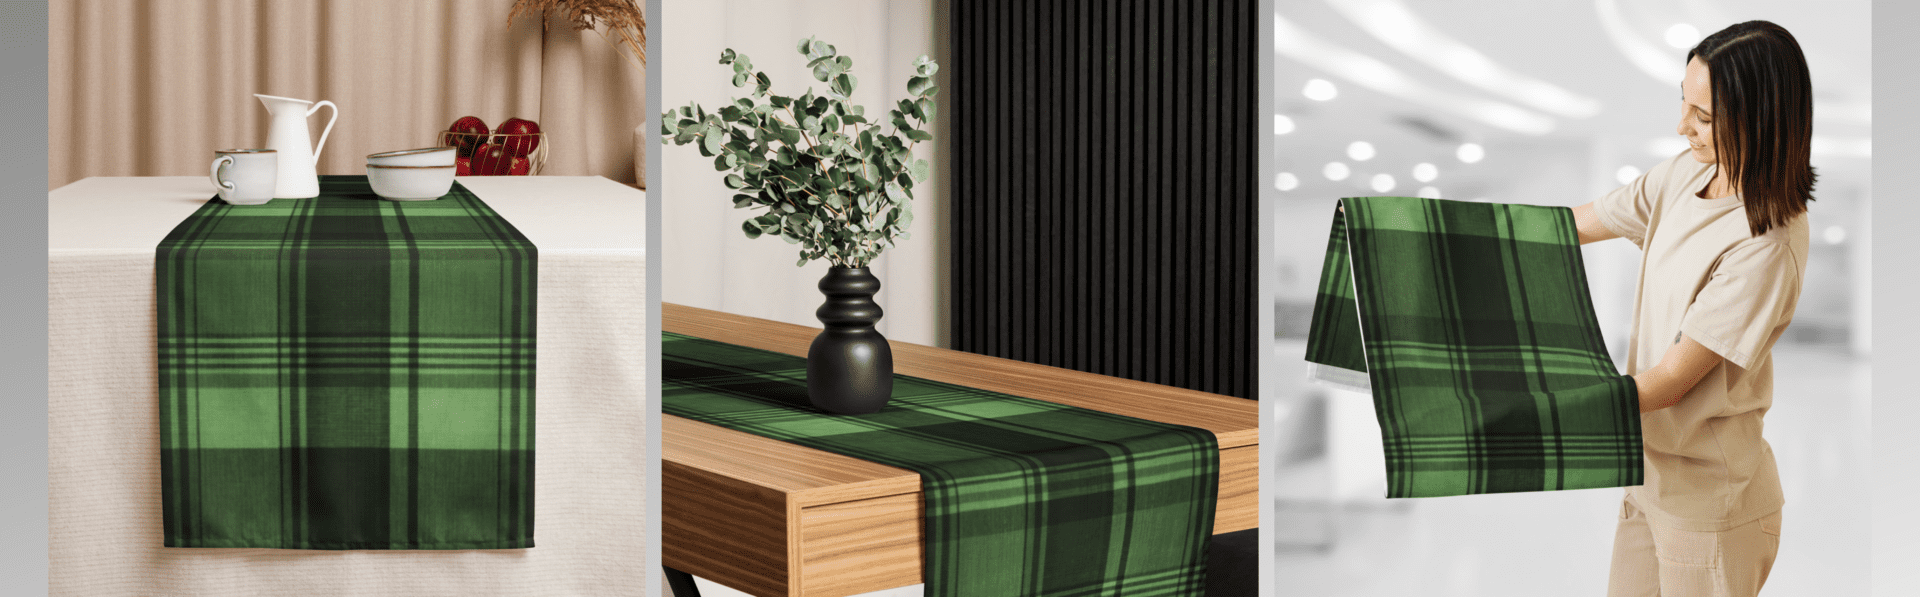 Green and black plaid table runner.